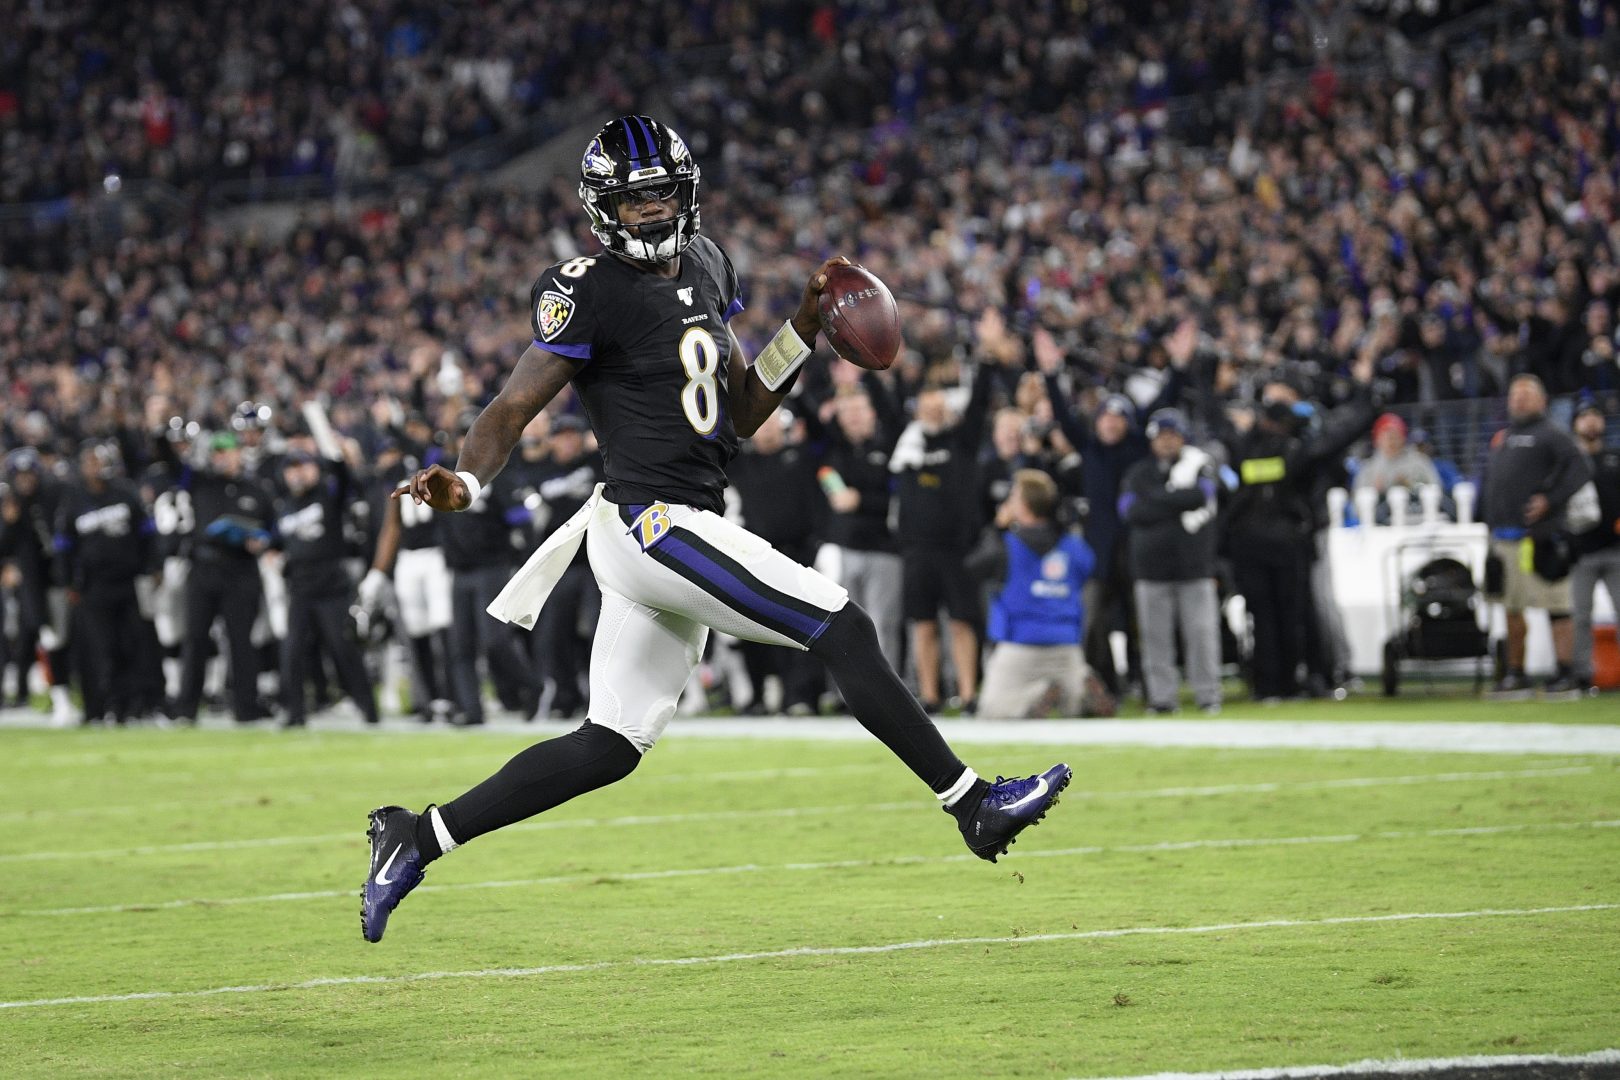 Baltimore Ravens quarterback Lamar Jackson scores on a run against the New England Patriots during the first half of an NFL football game, Sunday, Nov. 3, 2019, in Baltimore.